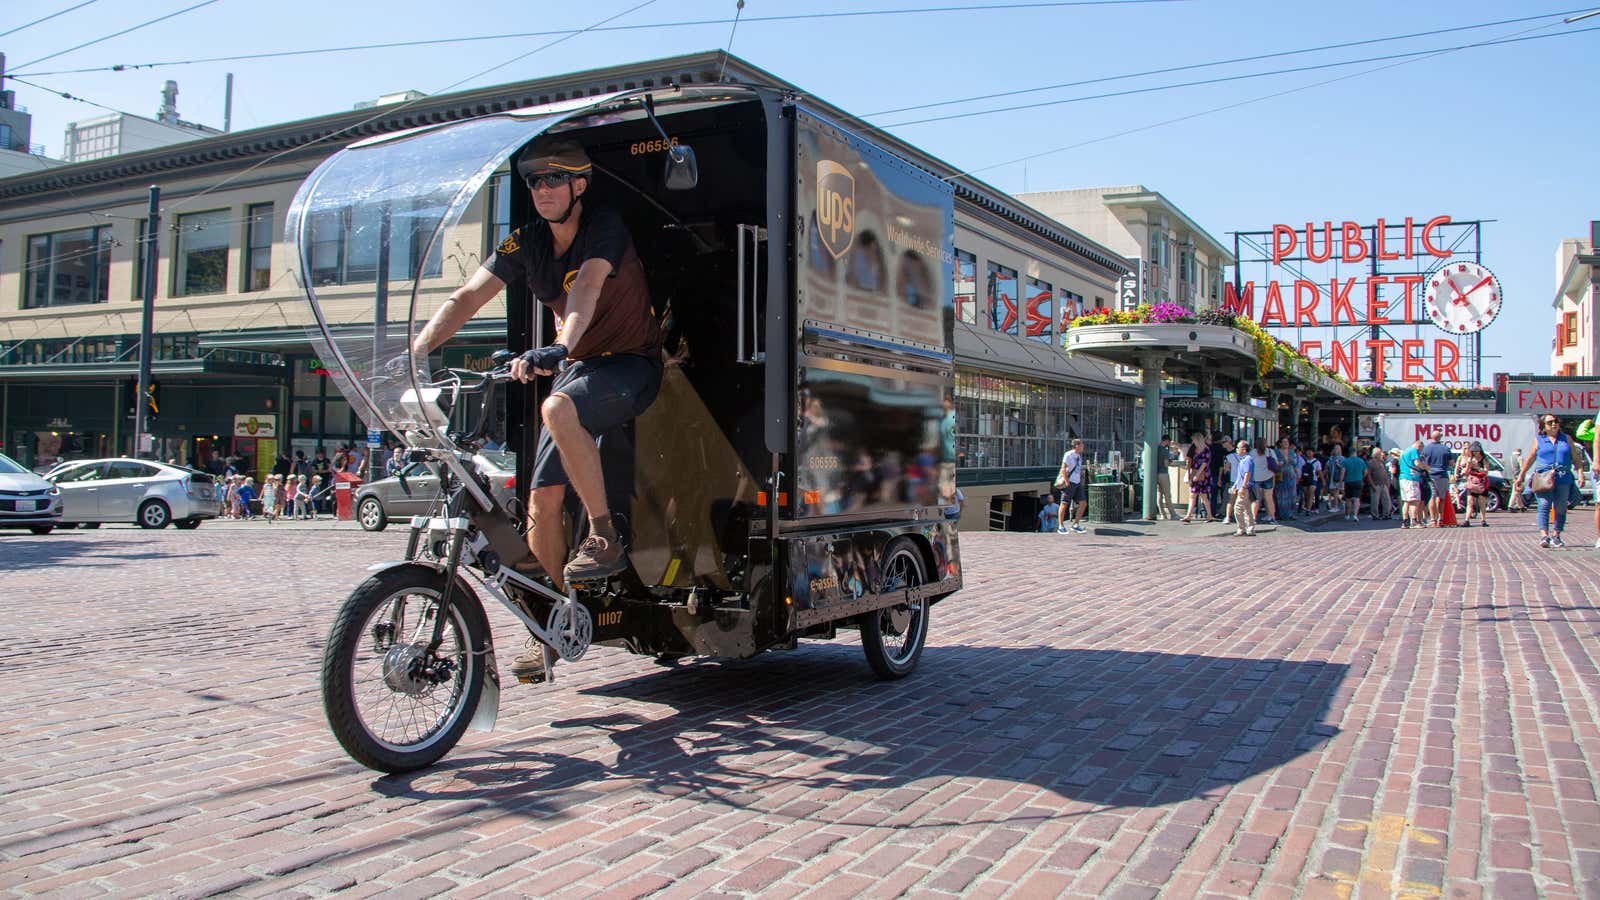 A UPS e-bike delivery person rides through the bumpy brick road in Seattles Pike Place Market.